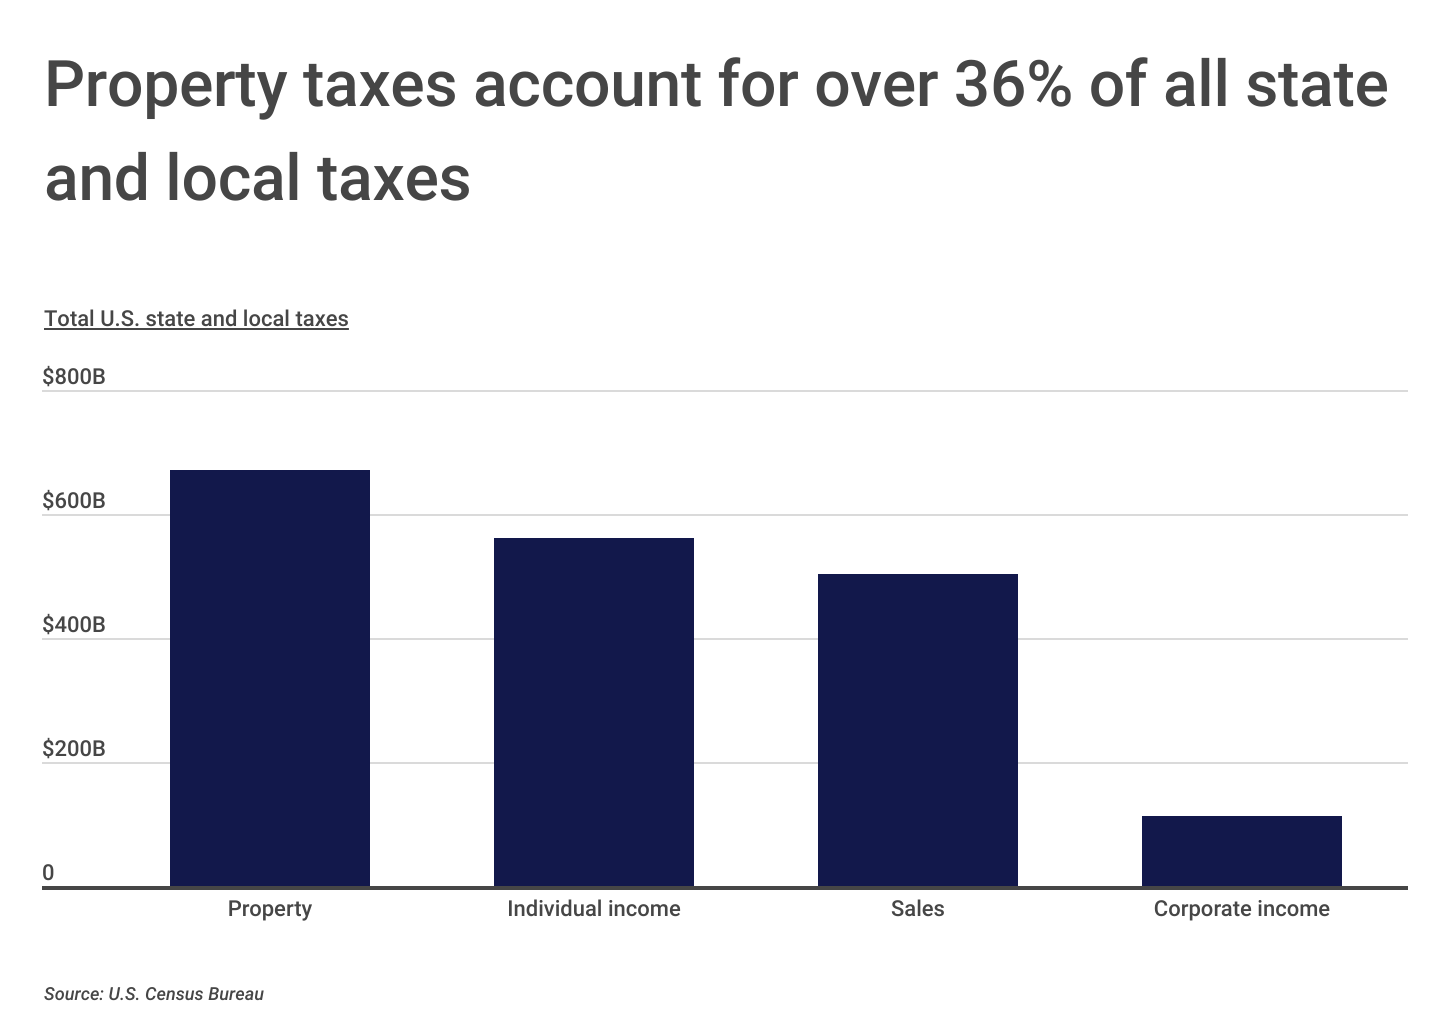 Chart1_Property taxes account for over 36% of all state and local taxes